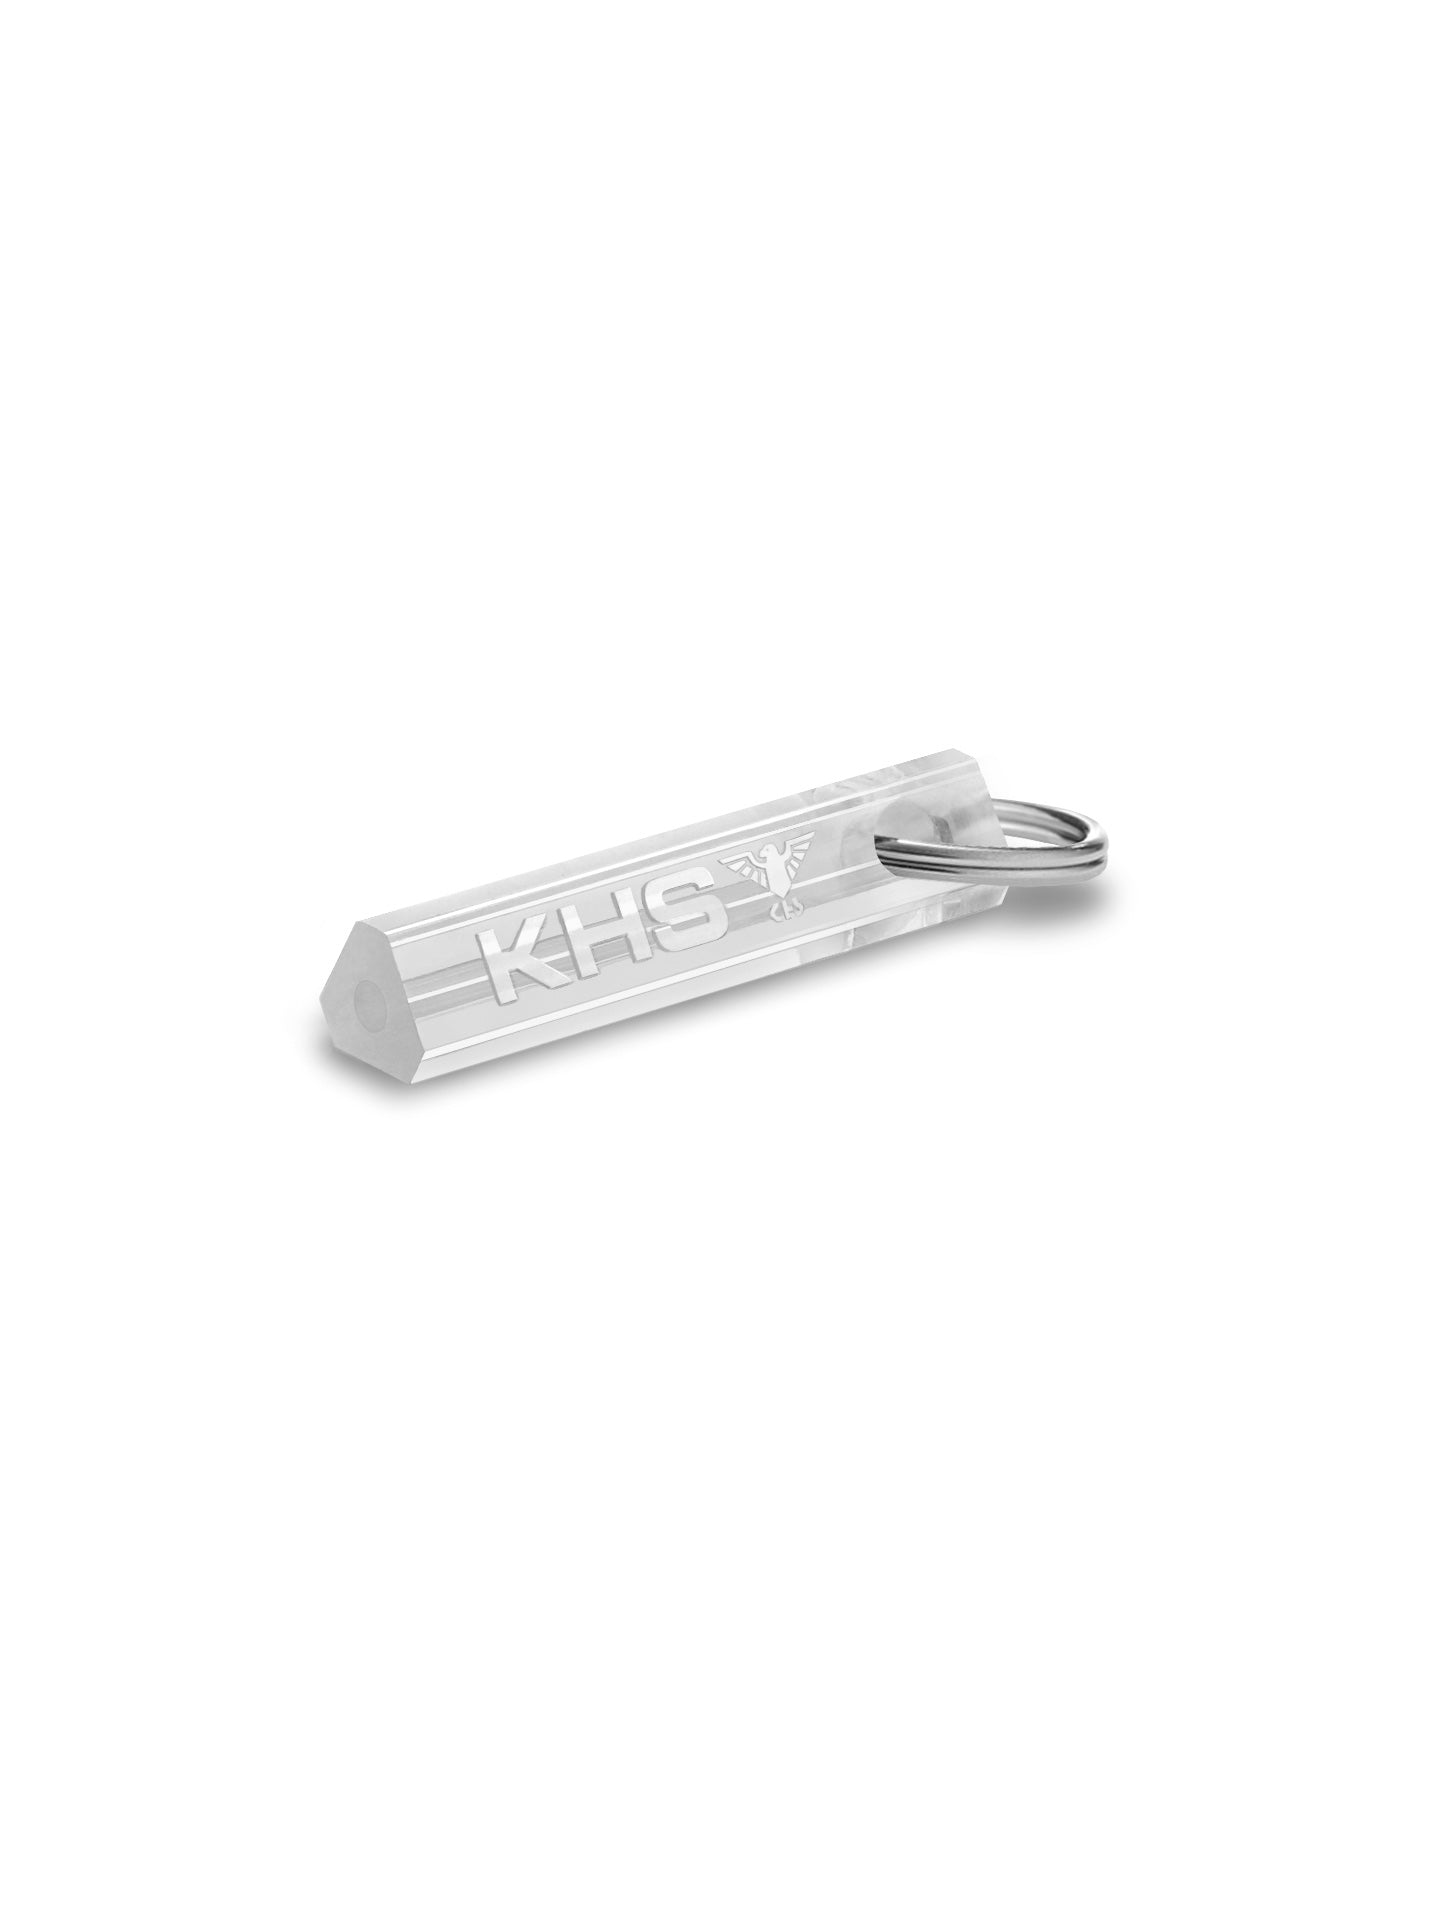 100 TRIGATAGS® with key ring